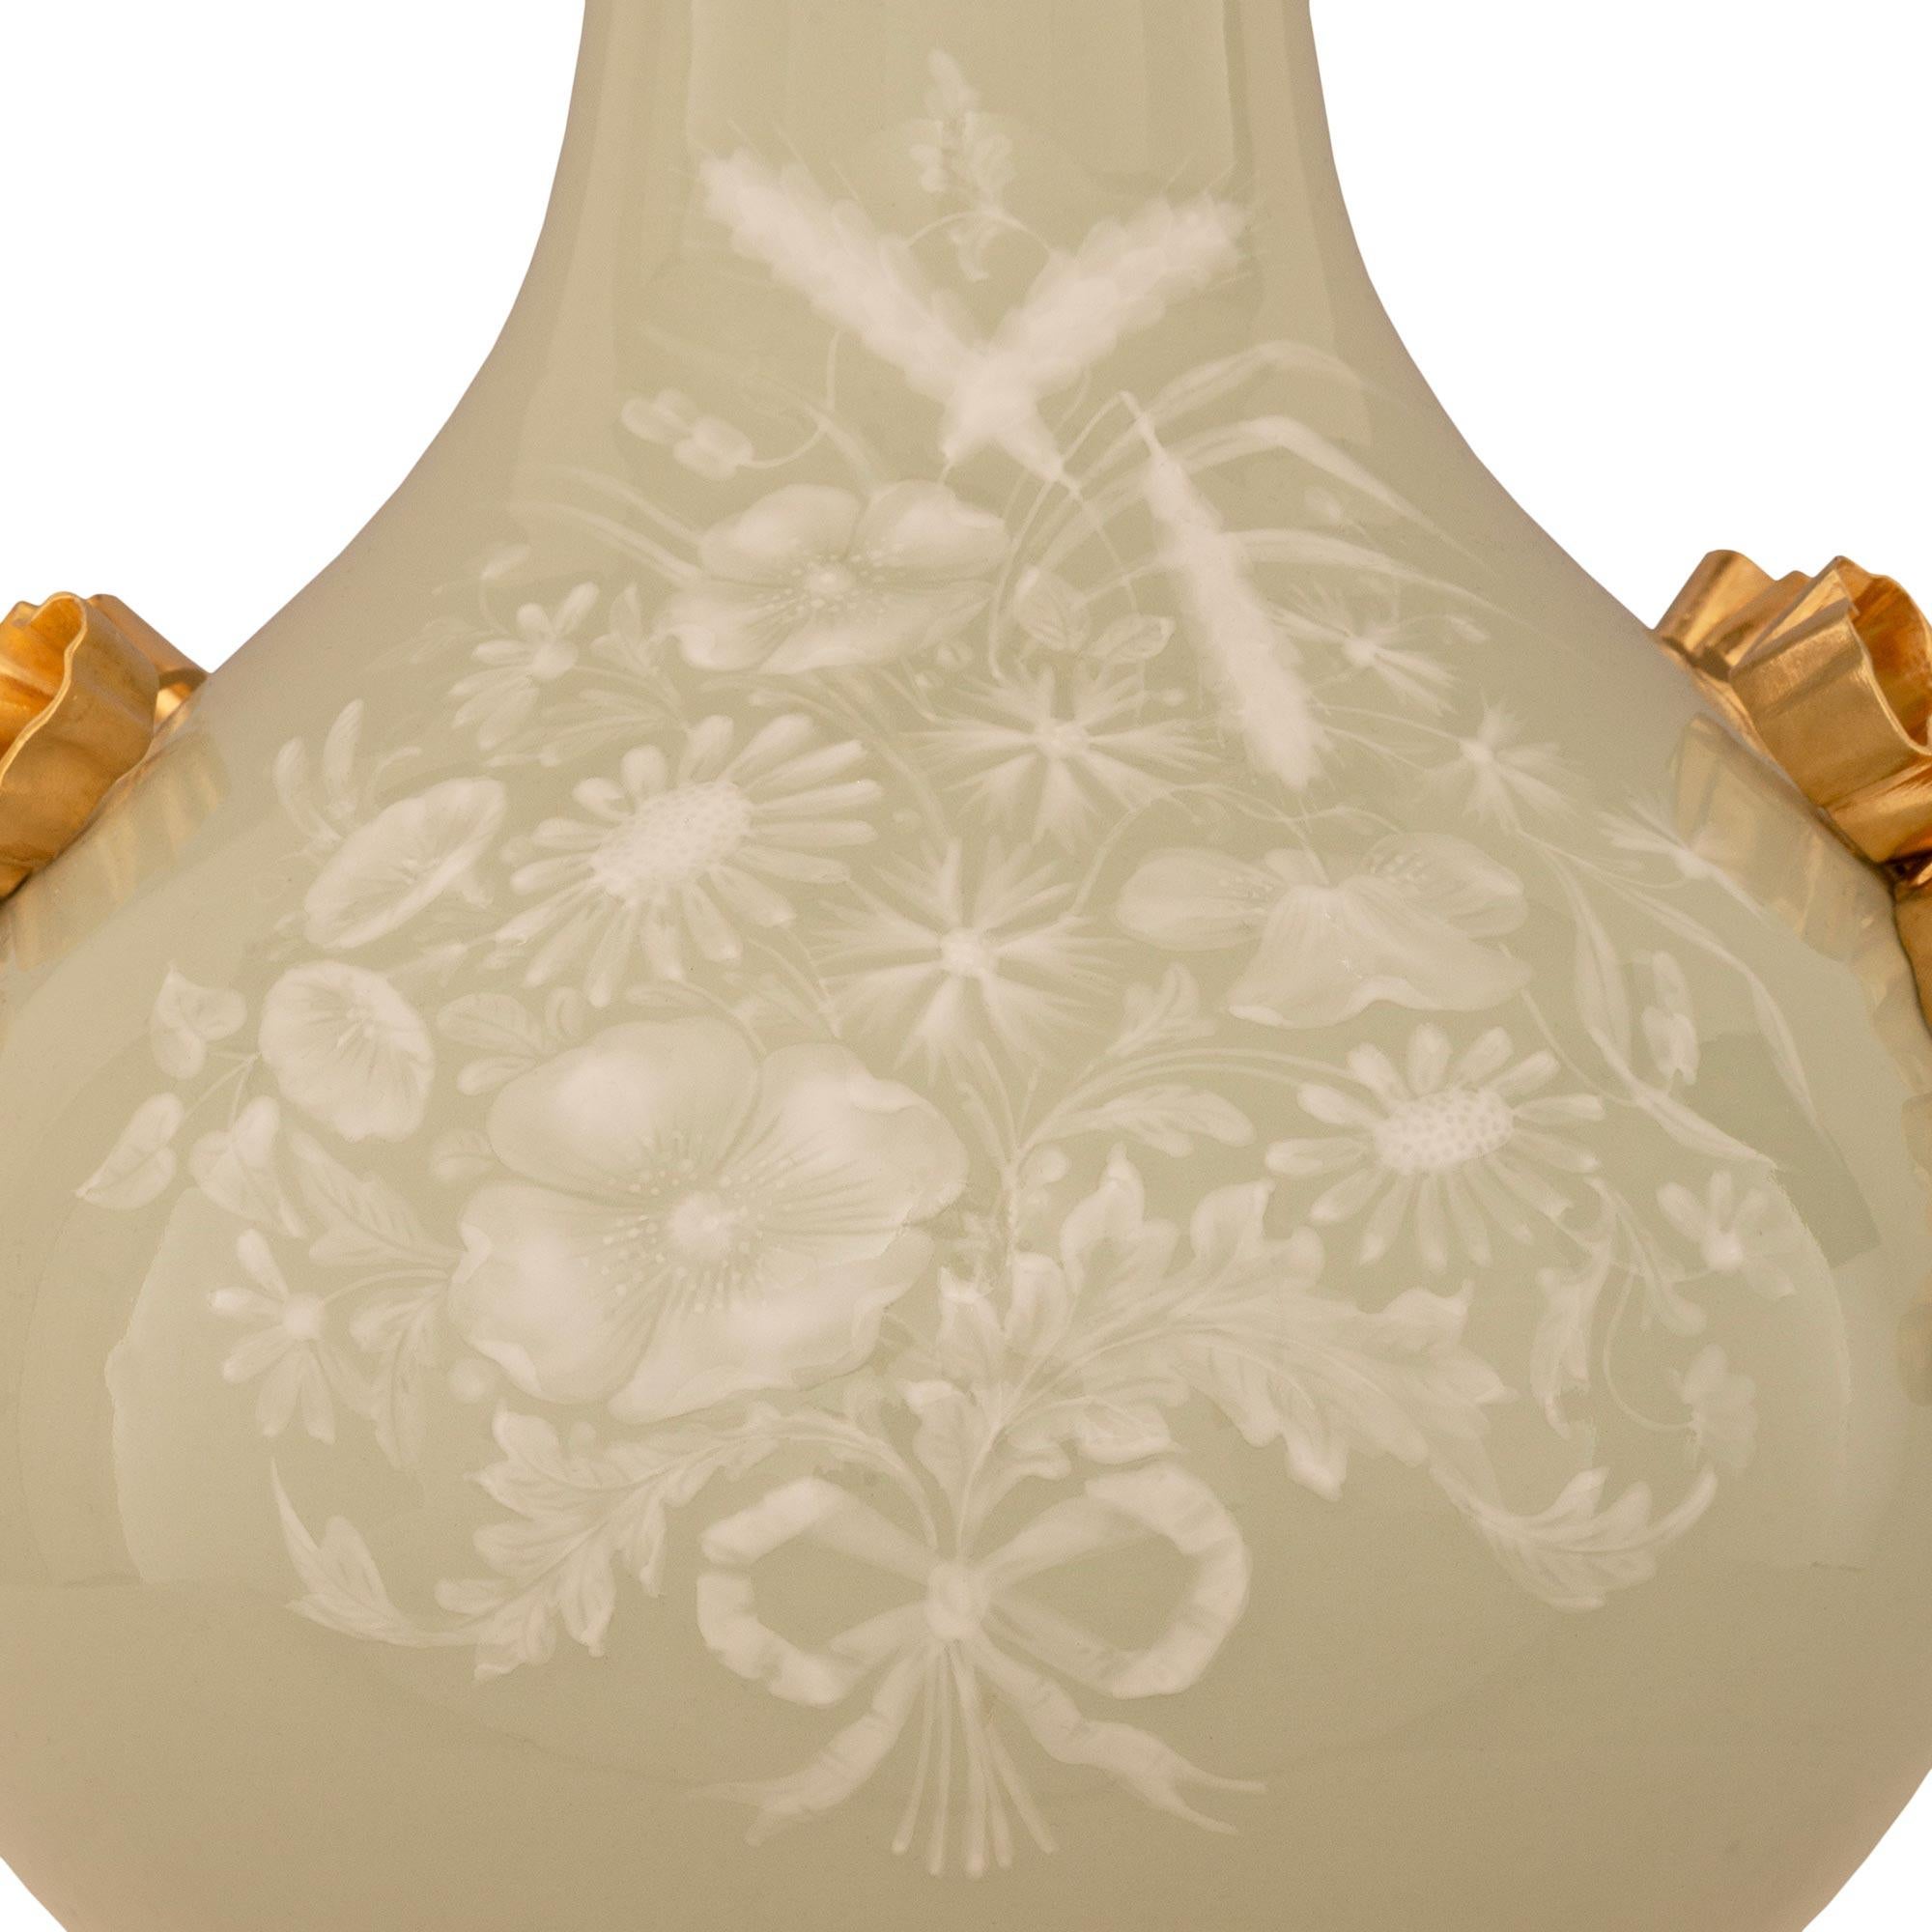 A lovely and most decorative French 19th century Louis XVI st. Celadon Porcelain and Ormolu lamp. This stunning Pâte-Sur-Pâte Porcelain lamp is raised by an elegant Ormolu base supported by four circular tapered fluted feet with a beaded band around